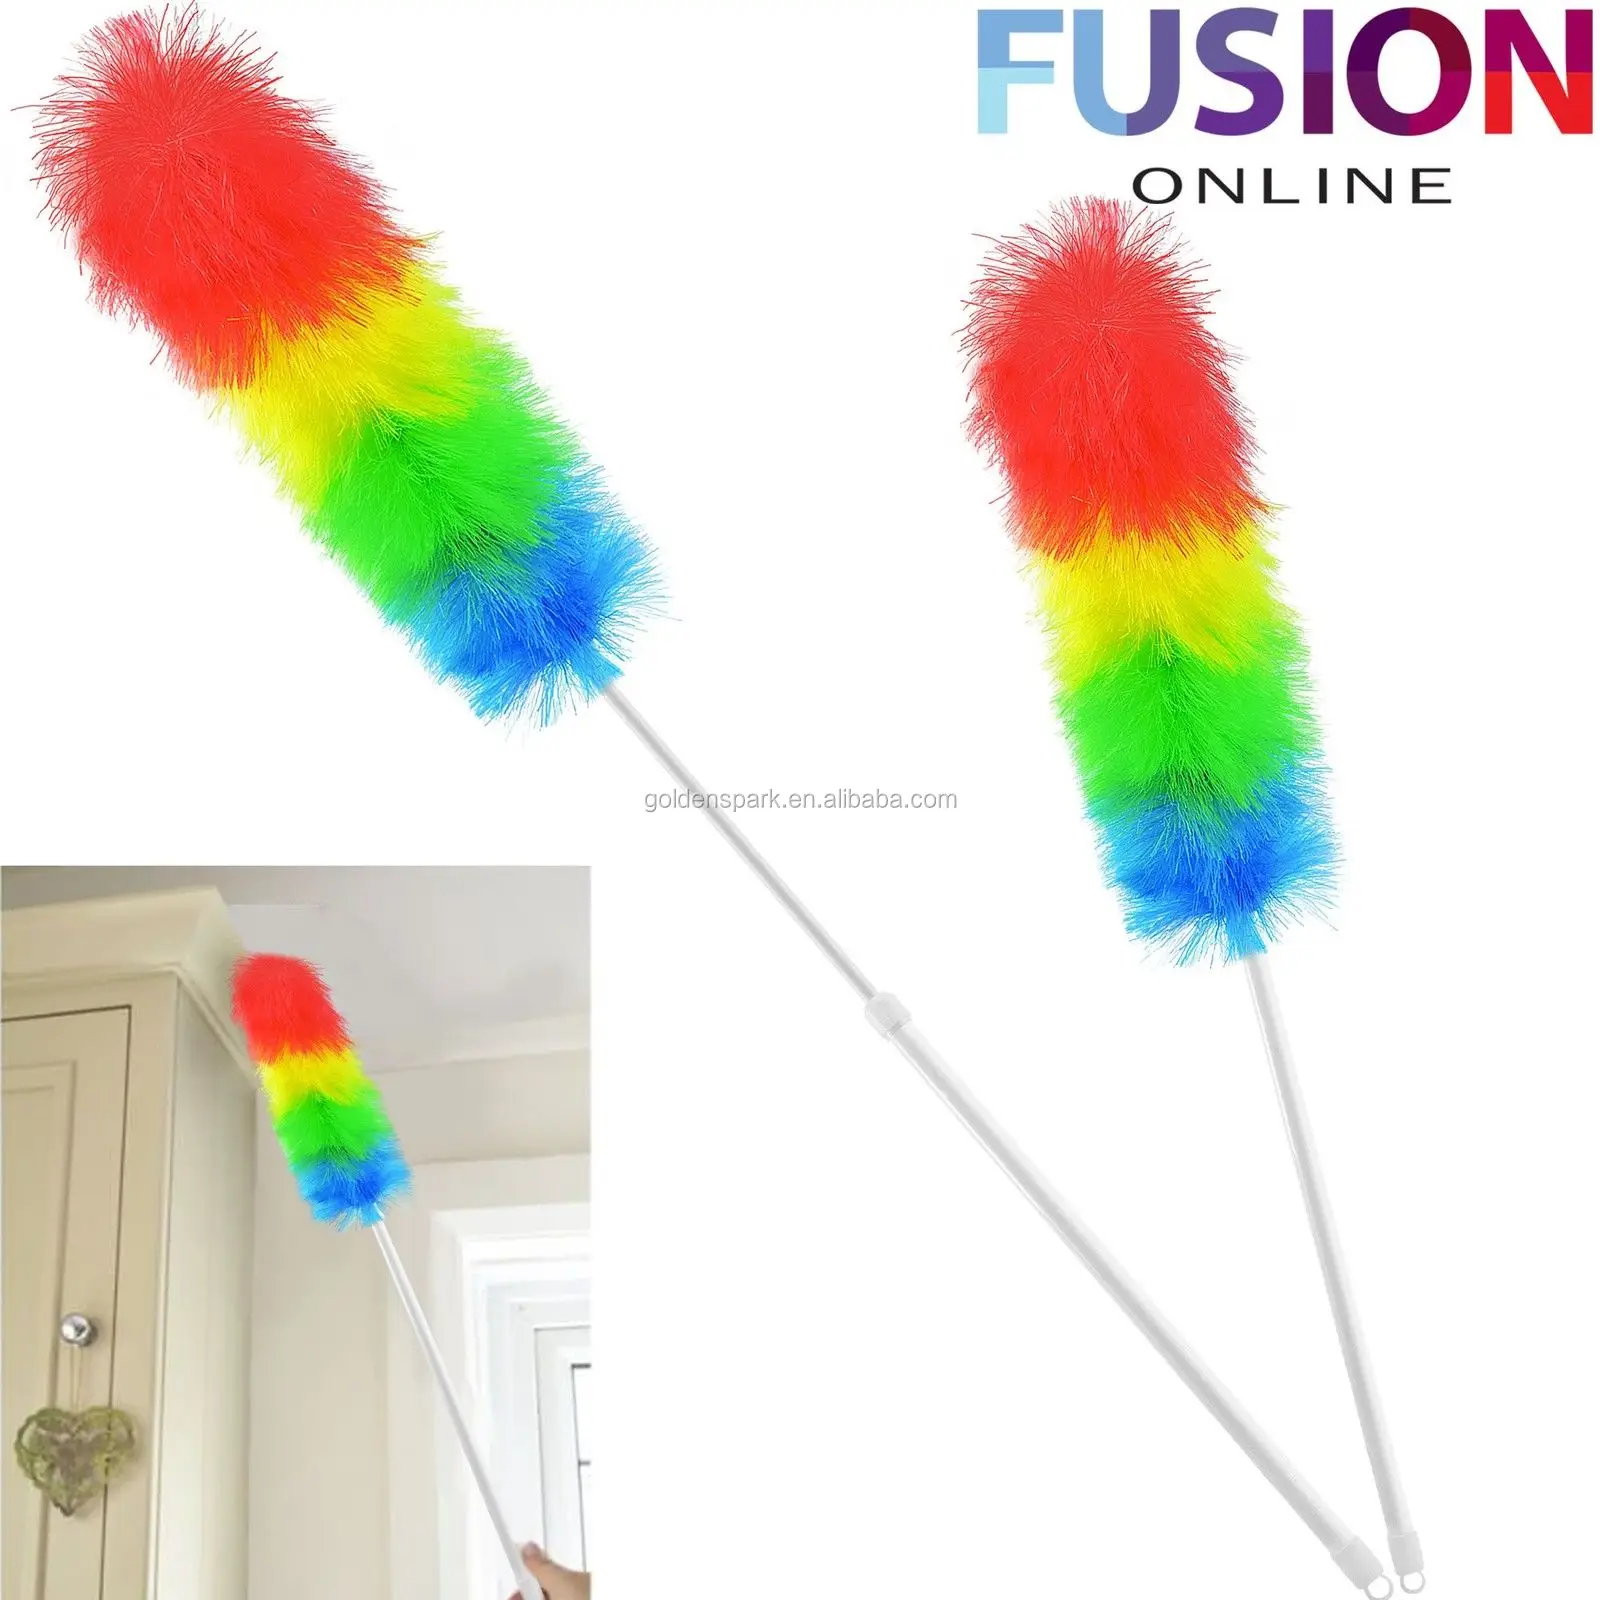 Microfiber Feather Duster Telescopic Extendable Handle Clean Magic Static Brush 